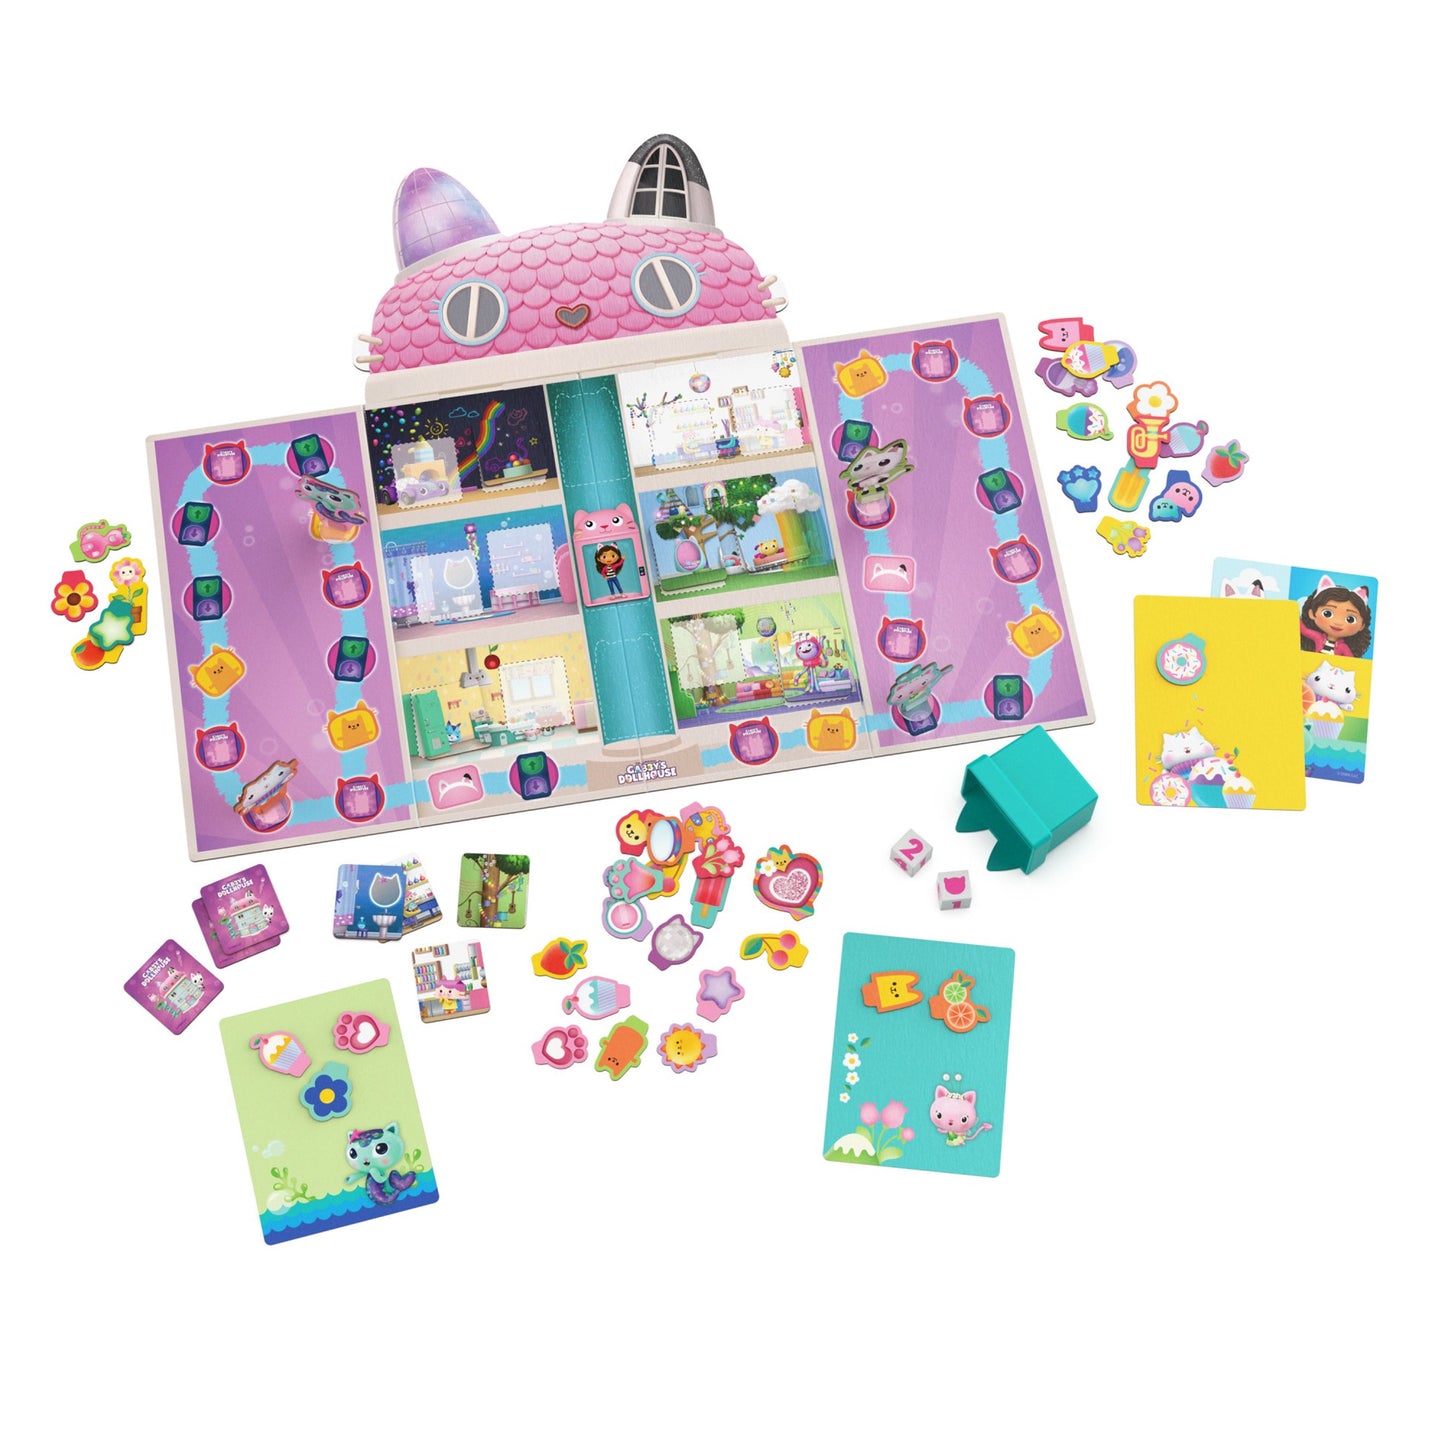 Gabby’s Dollhouse, Charming Collection Game Board Game for Kids Based on The Netflix Original Series Gabby’s Dollhouse Toys, for Kids Ages 4 and up